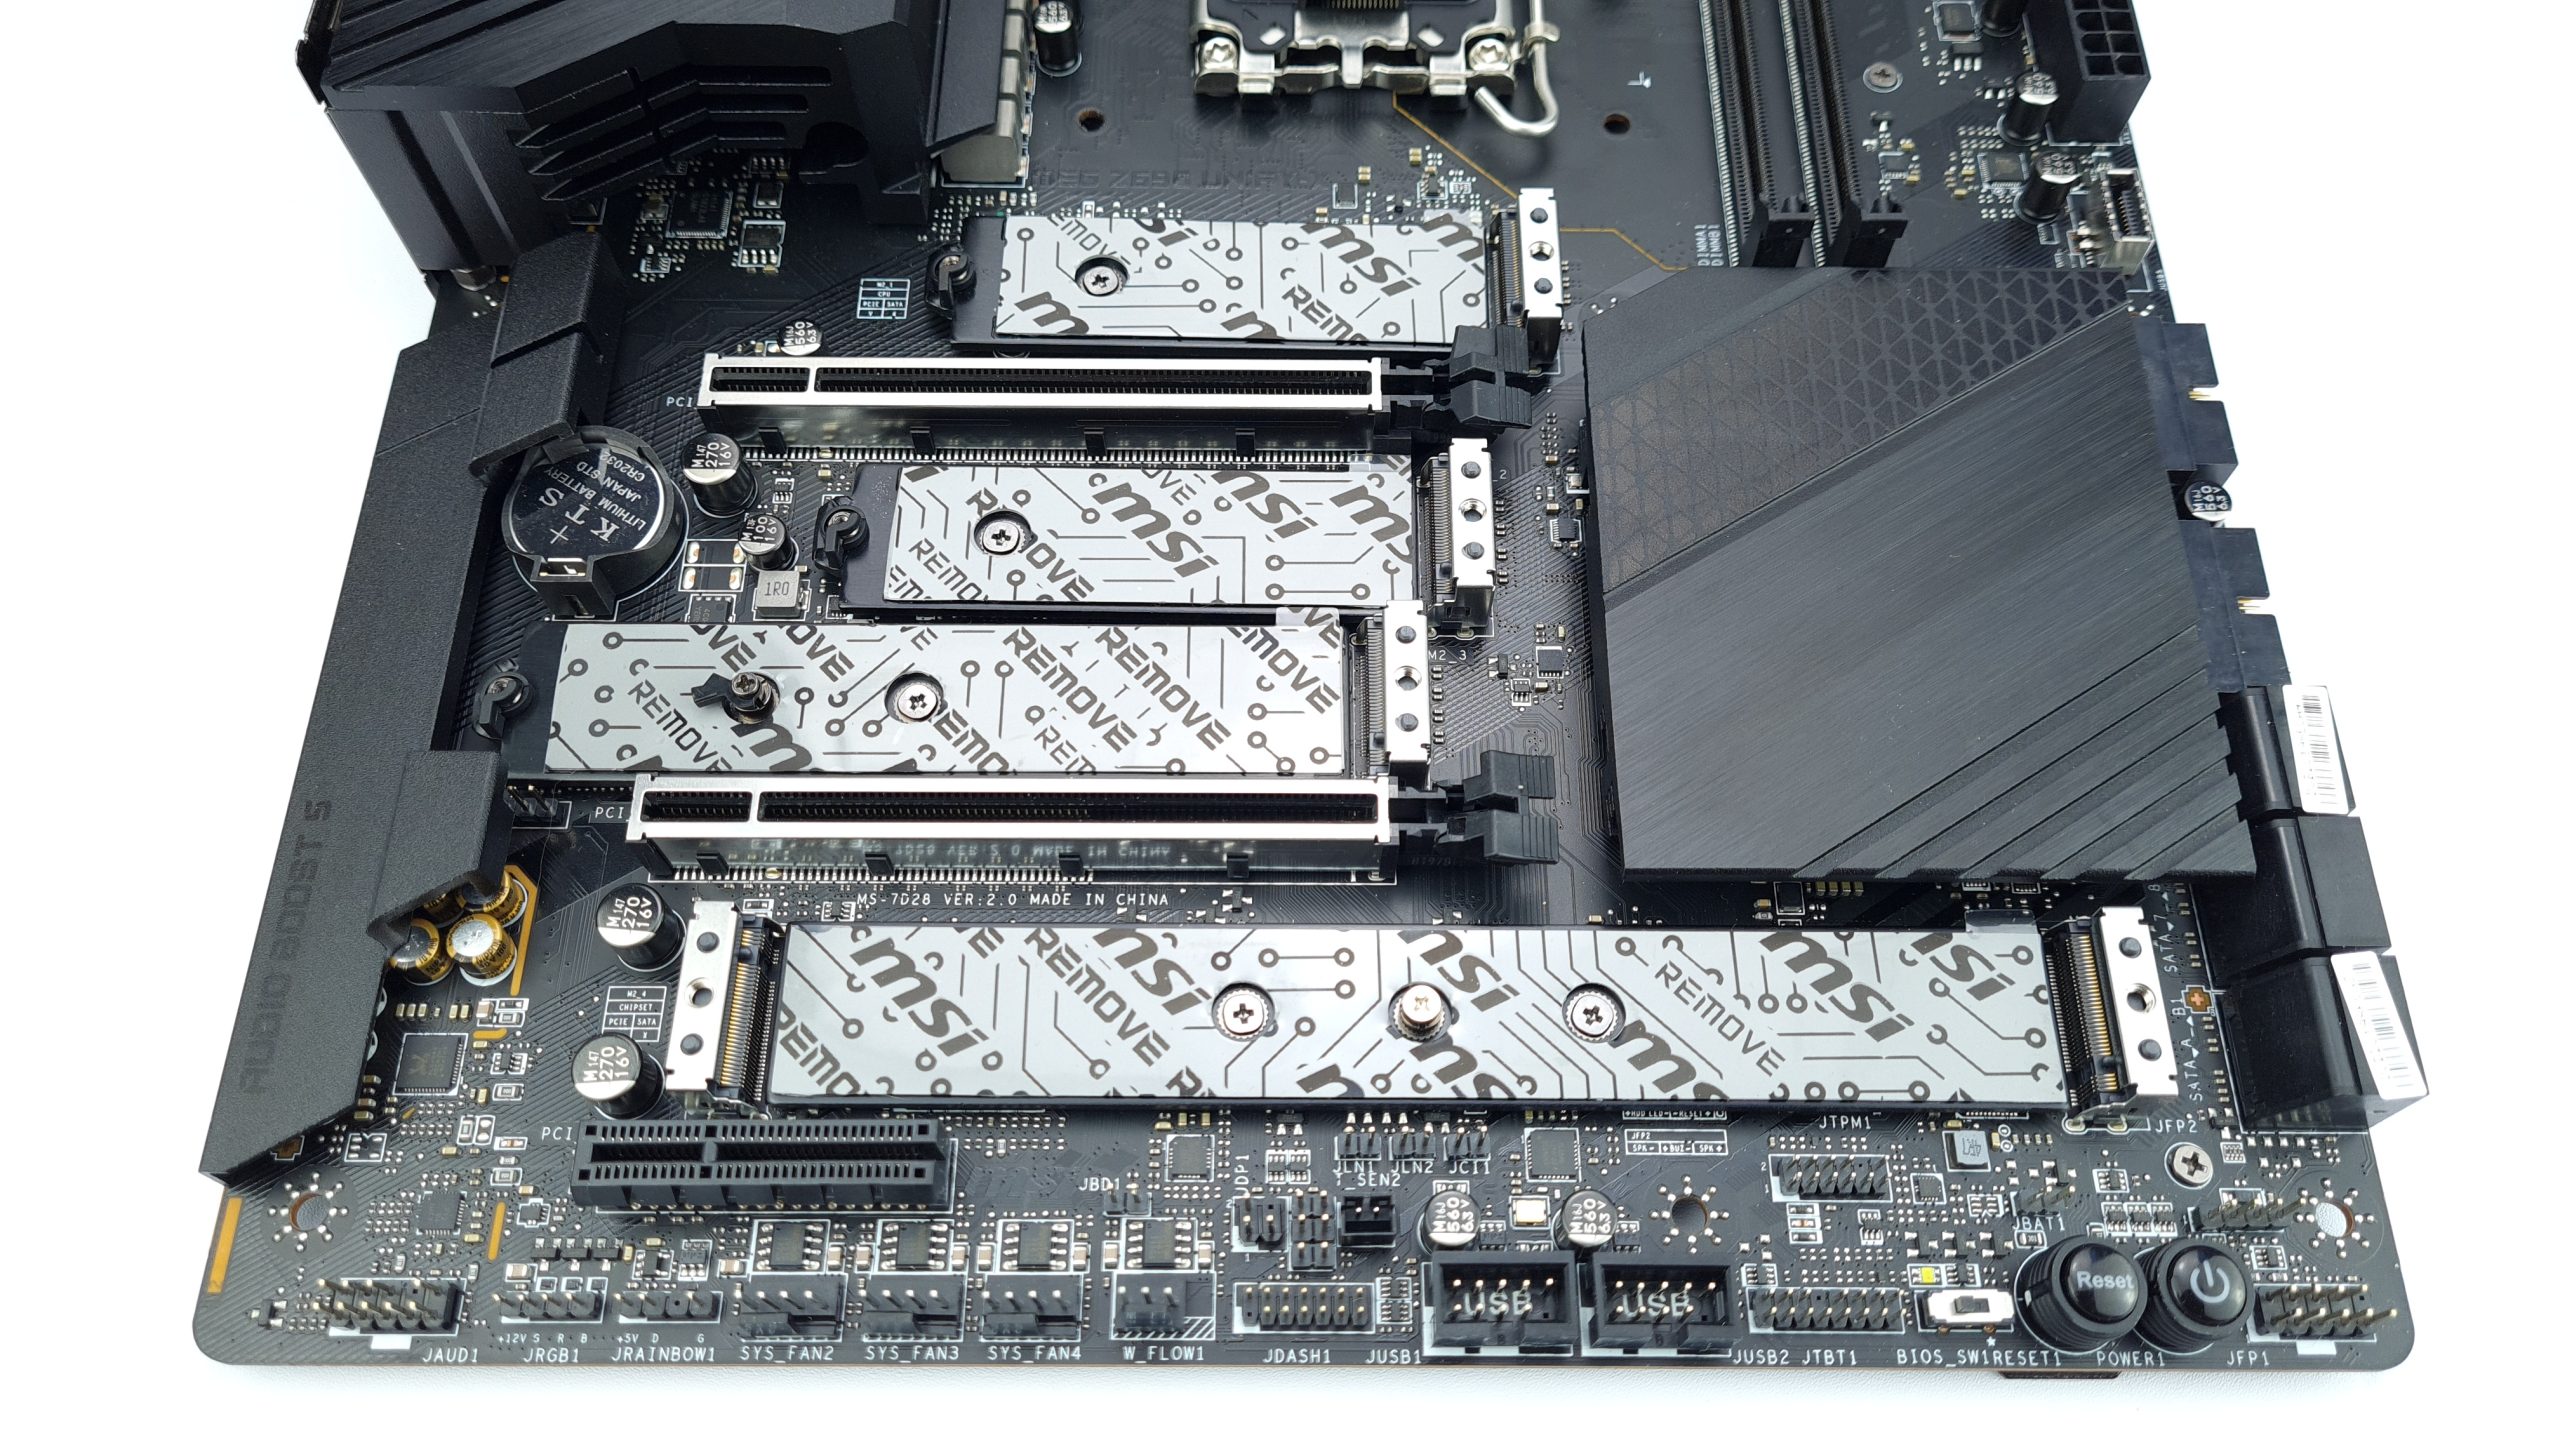 vertalen Resultaat Voorgevoel The last shall be first - MSI MEG Z690 Unify-X review with teardown, DDR5  and Adaptive OC | Page 2 | igor'sLAB